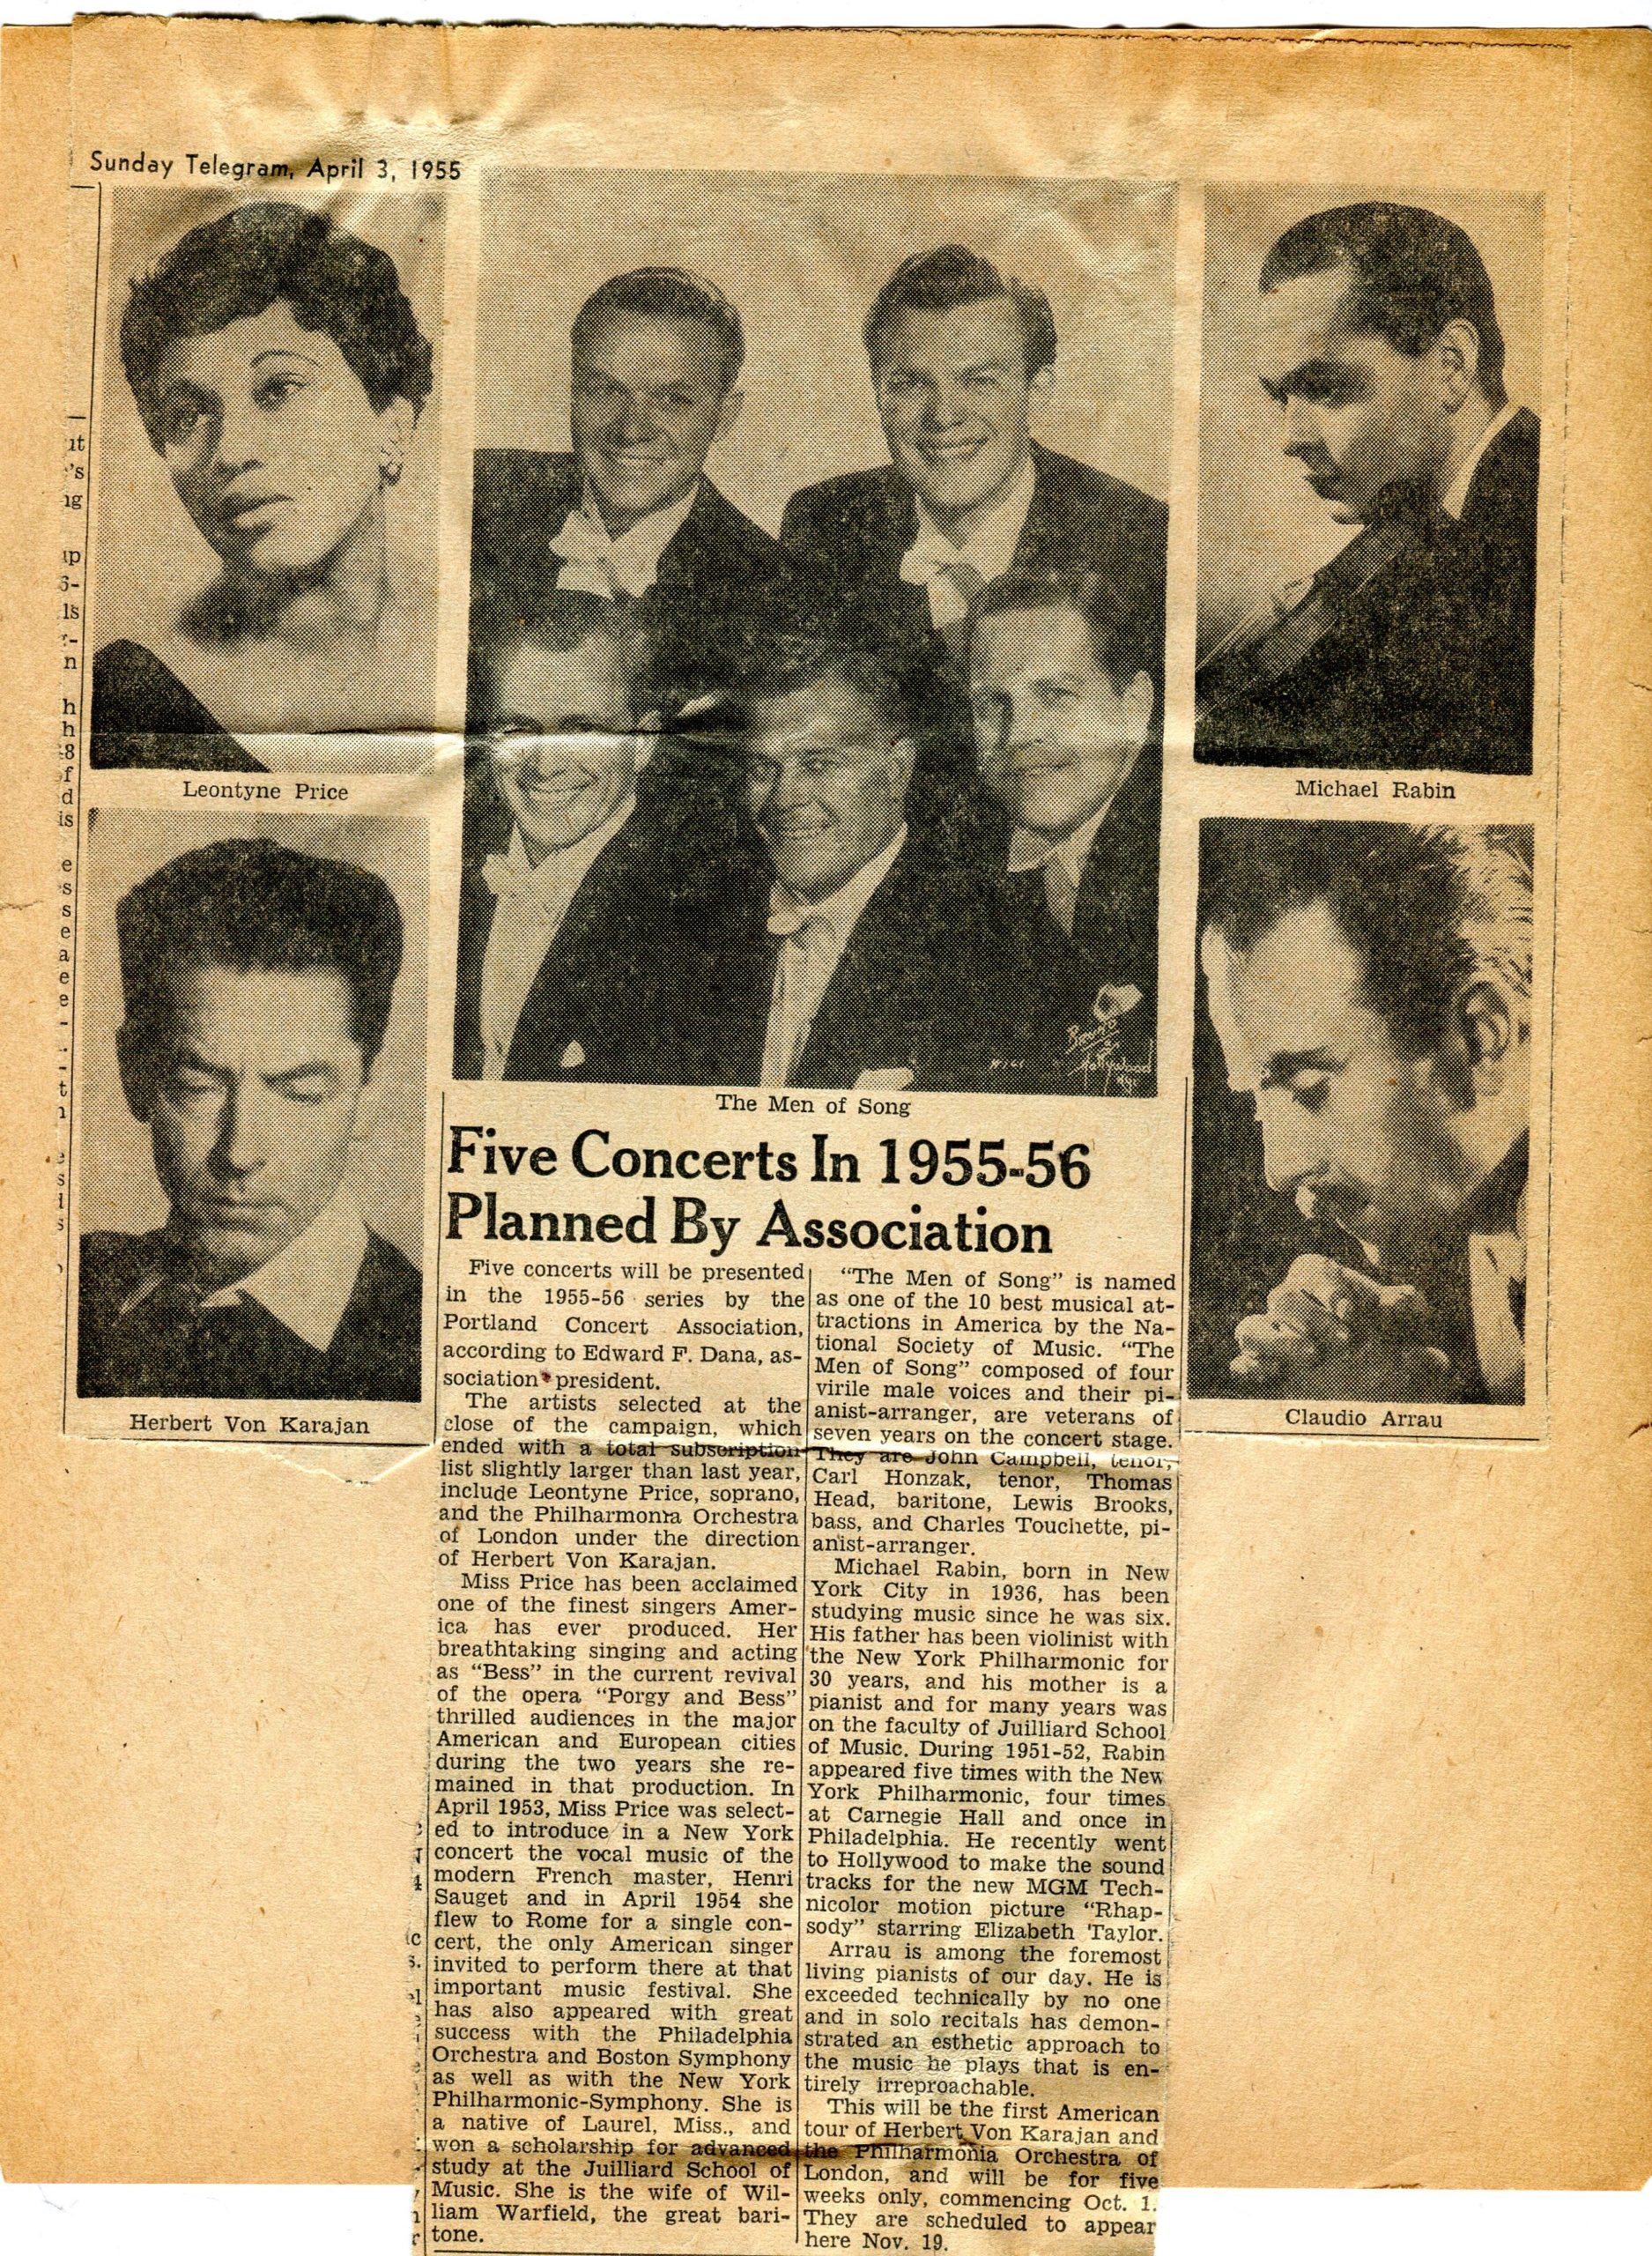 Newspaper clipping featuring artists featured in the 1955-56 season